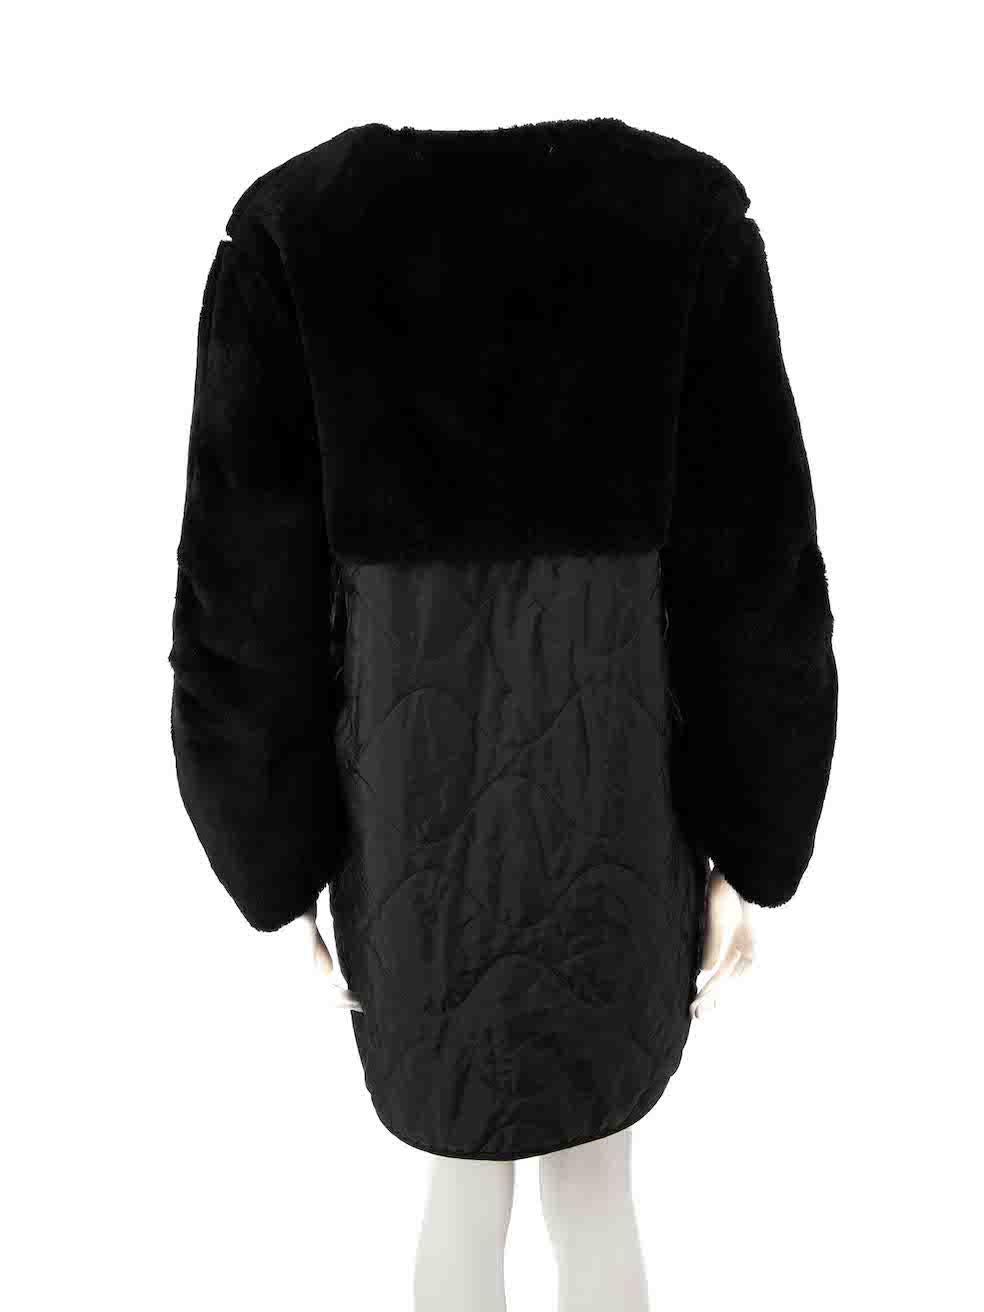 Marfa Stance Black Reversible Quilted Coat Size XS In Good Condition For Sale In London, GB